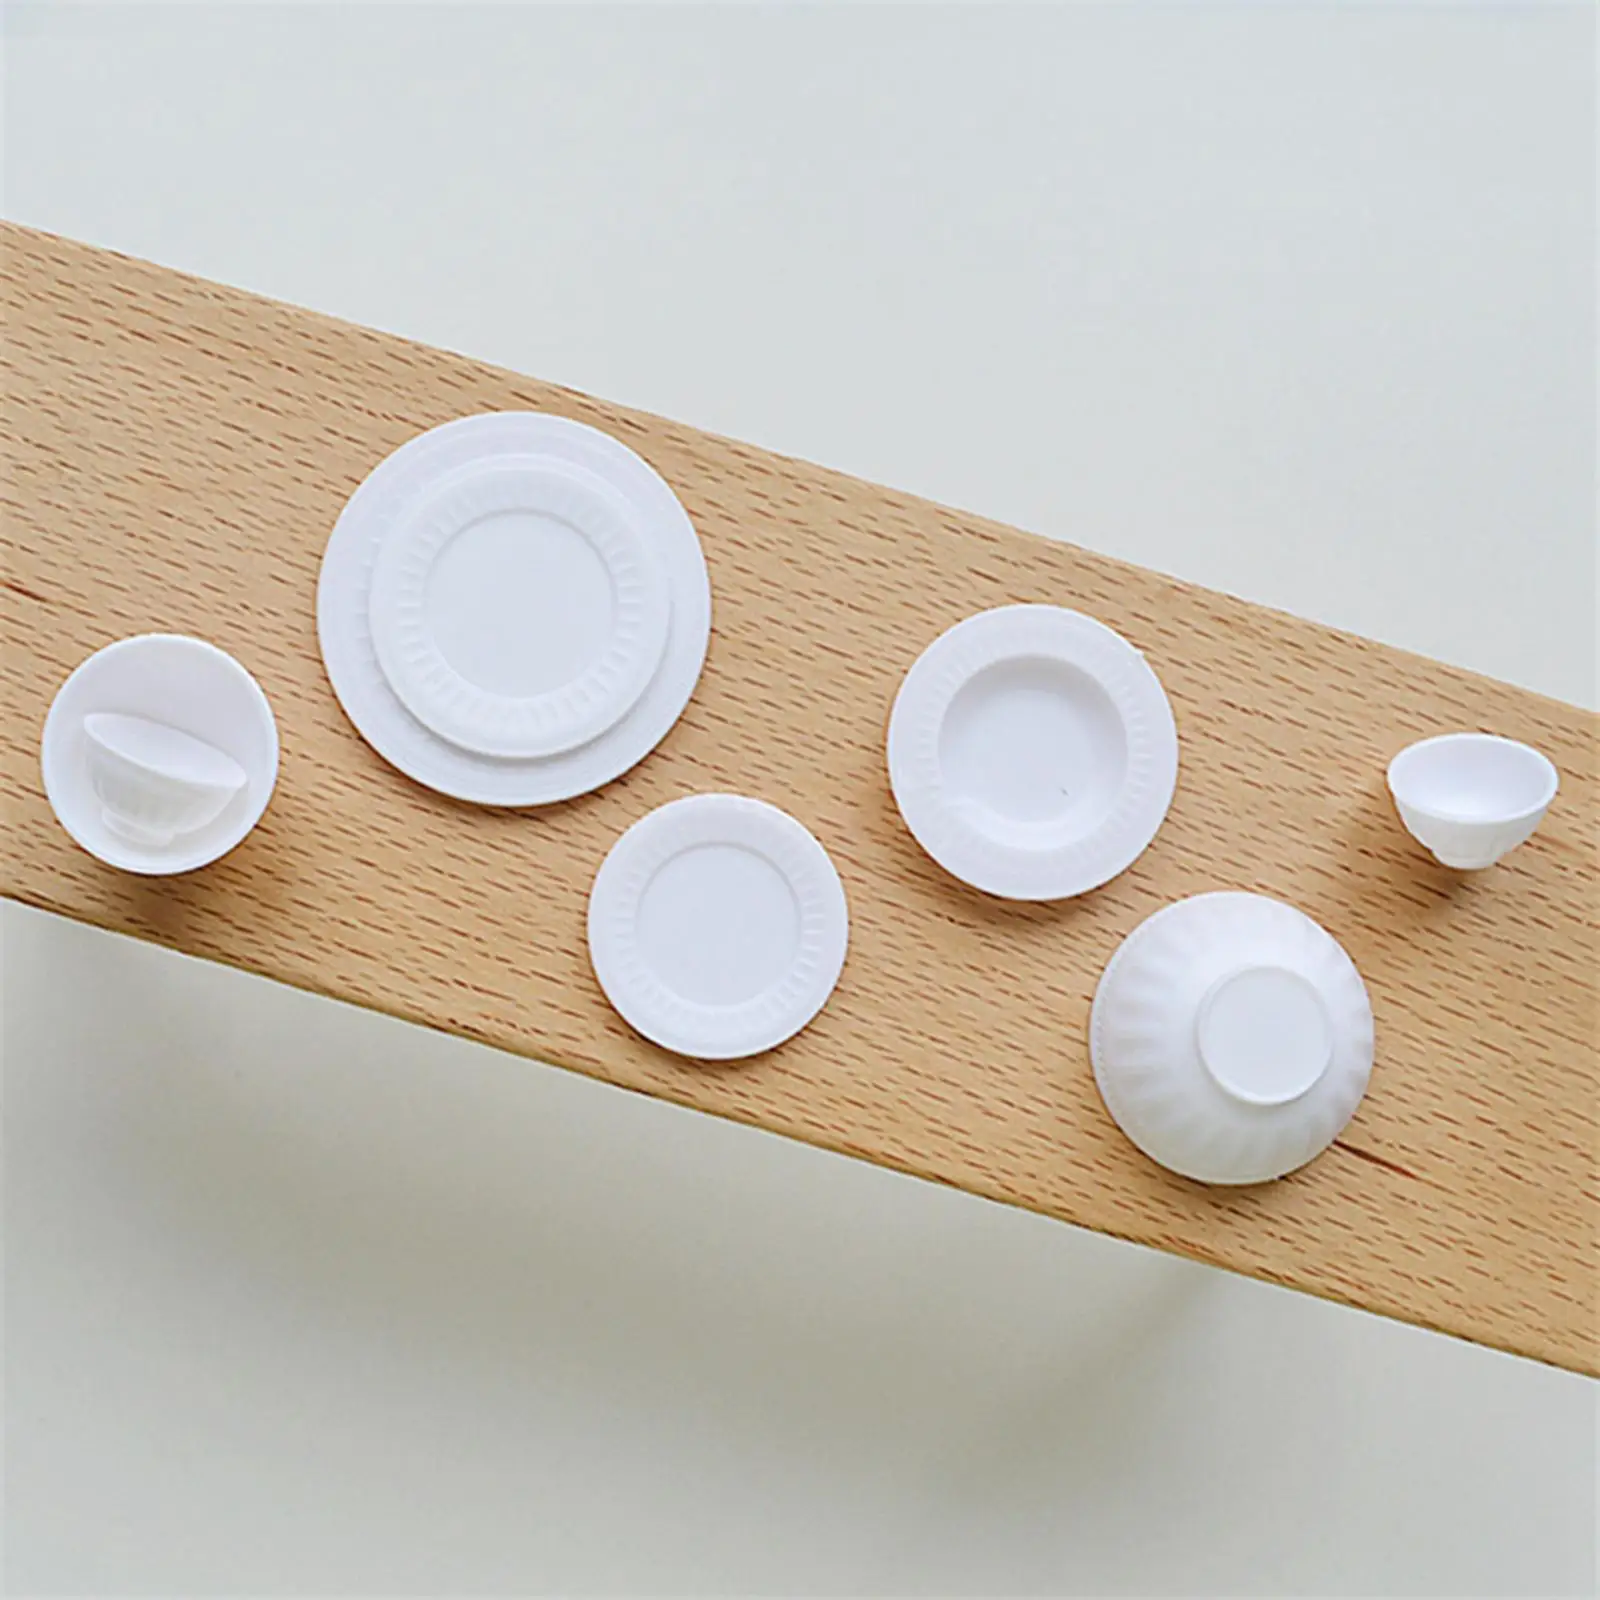 8x Miniature Dollhouse Kitchen Accessories 1 6 Scale Plate Bowl Party Cooking Game Food Kitchen Toy Accessories Dining Room